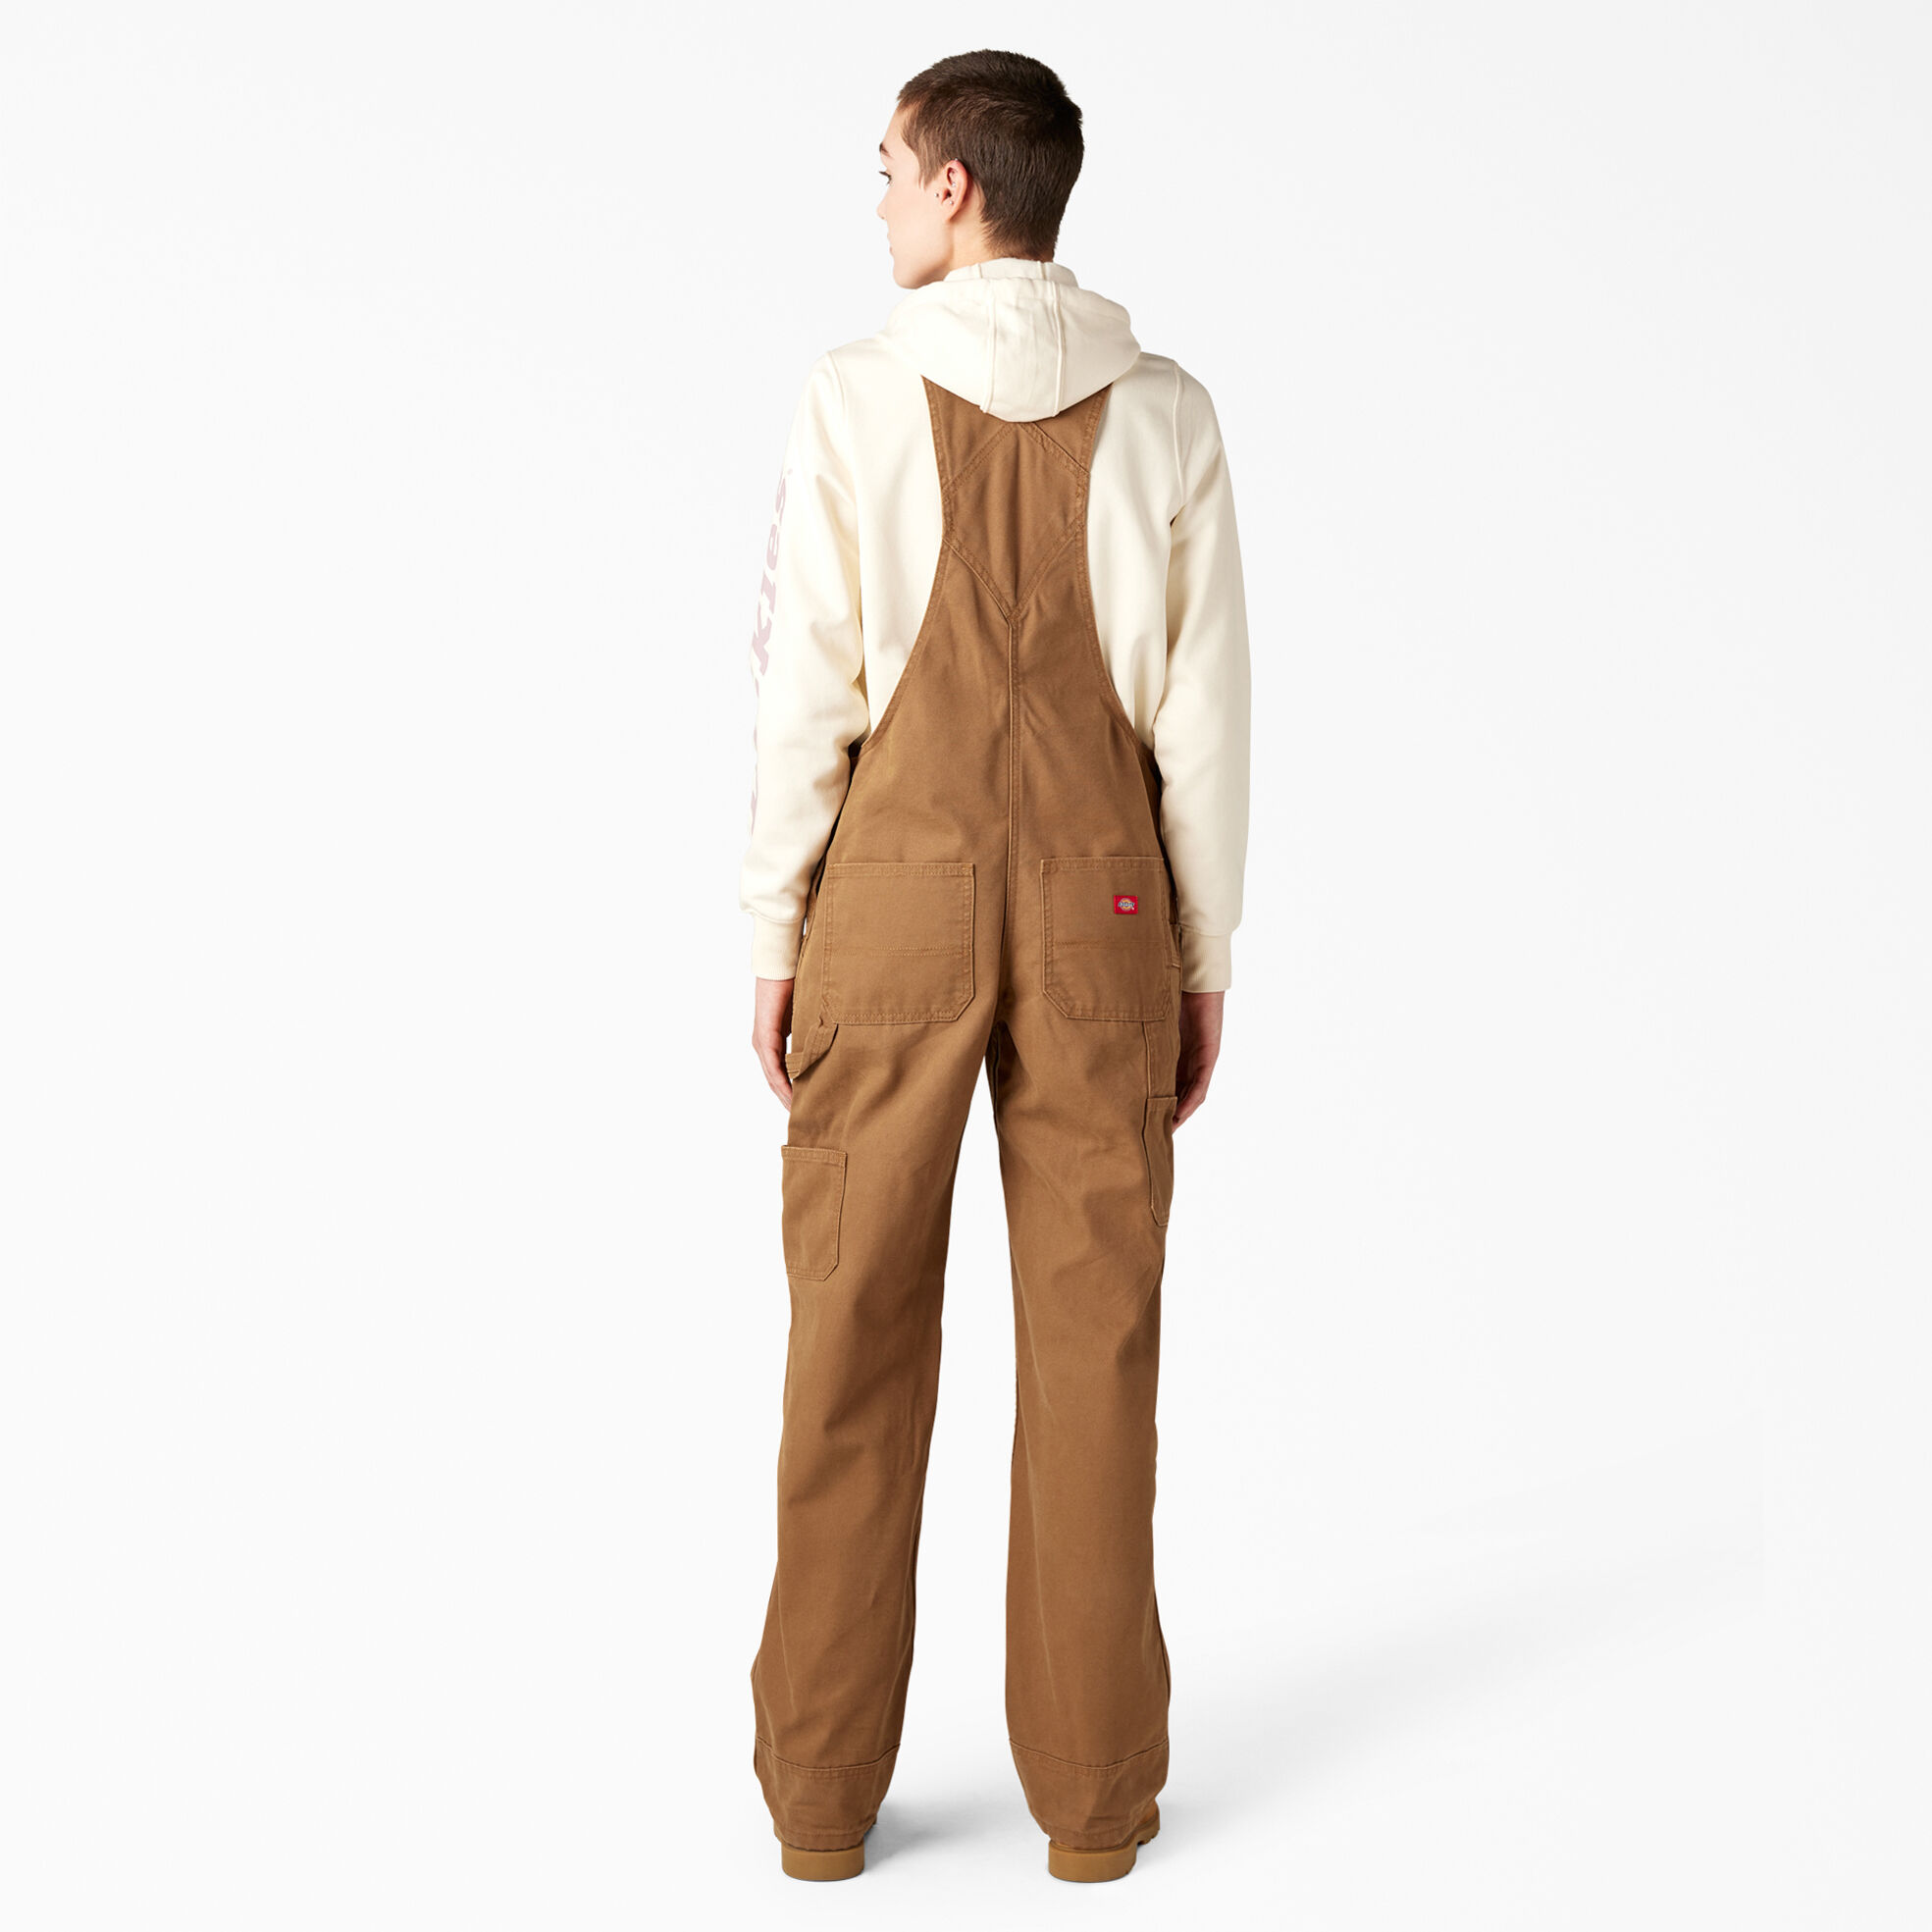 womens loose fit overalls